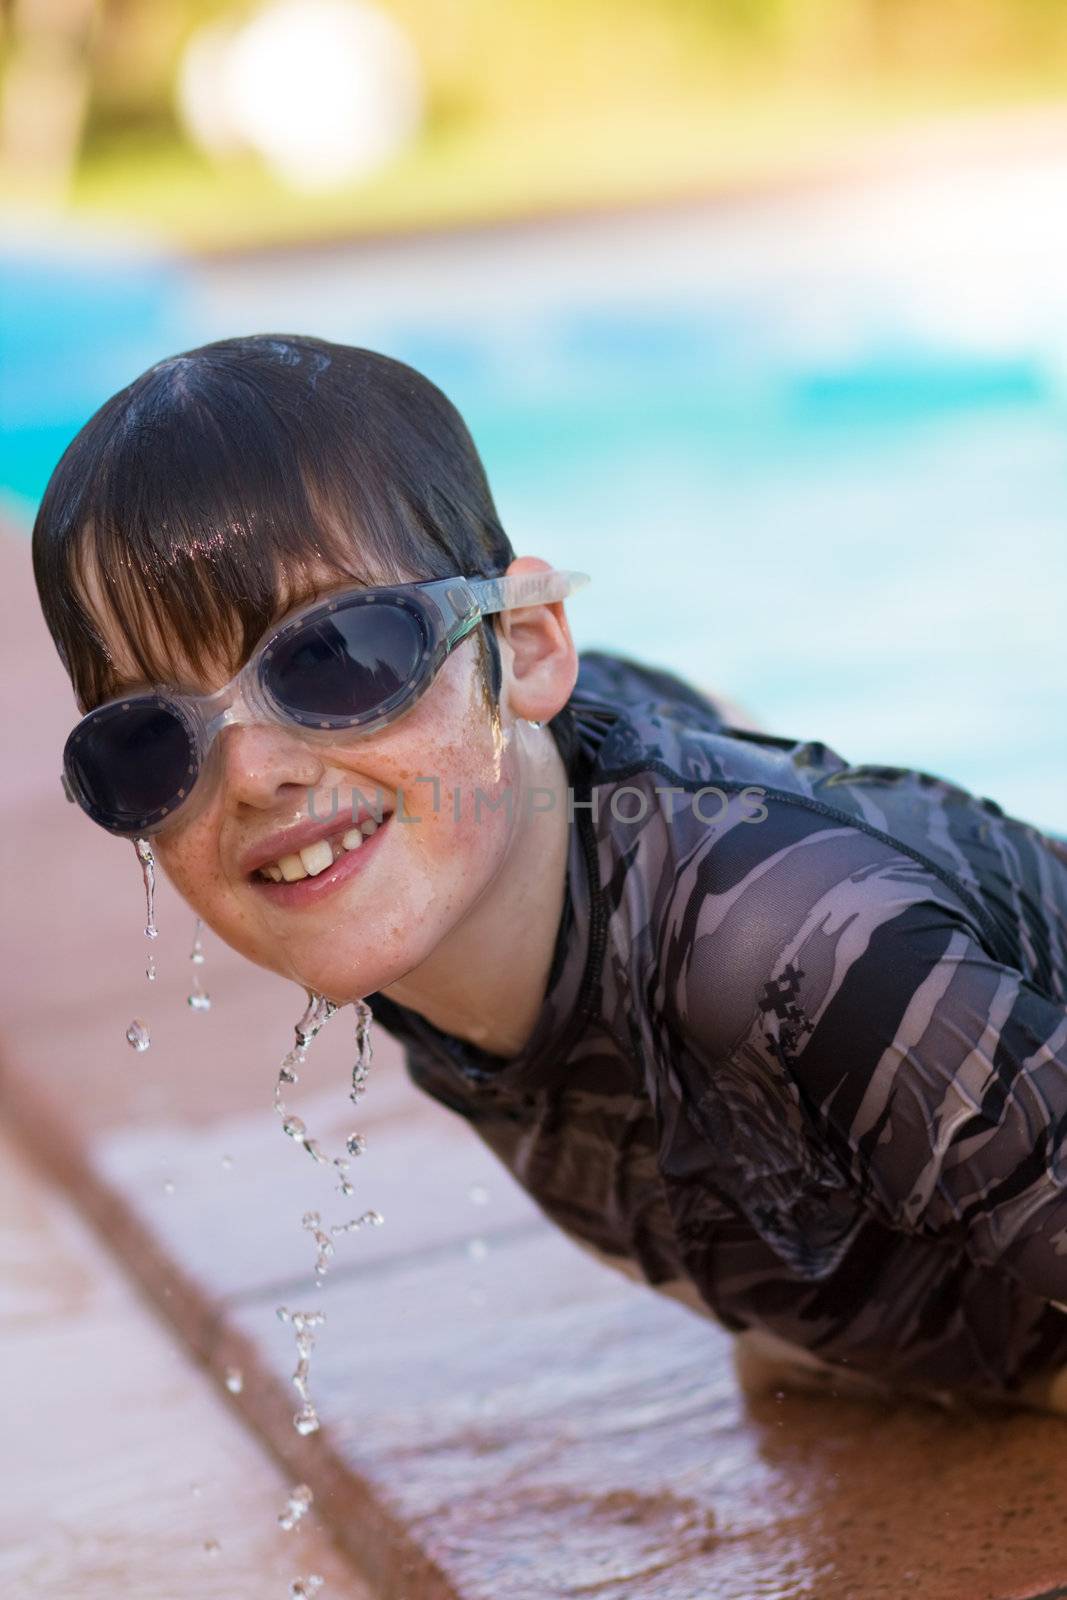 Boy wearing goggles emerges from swimming pool